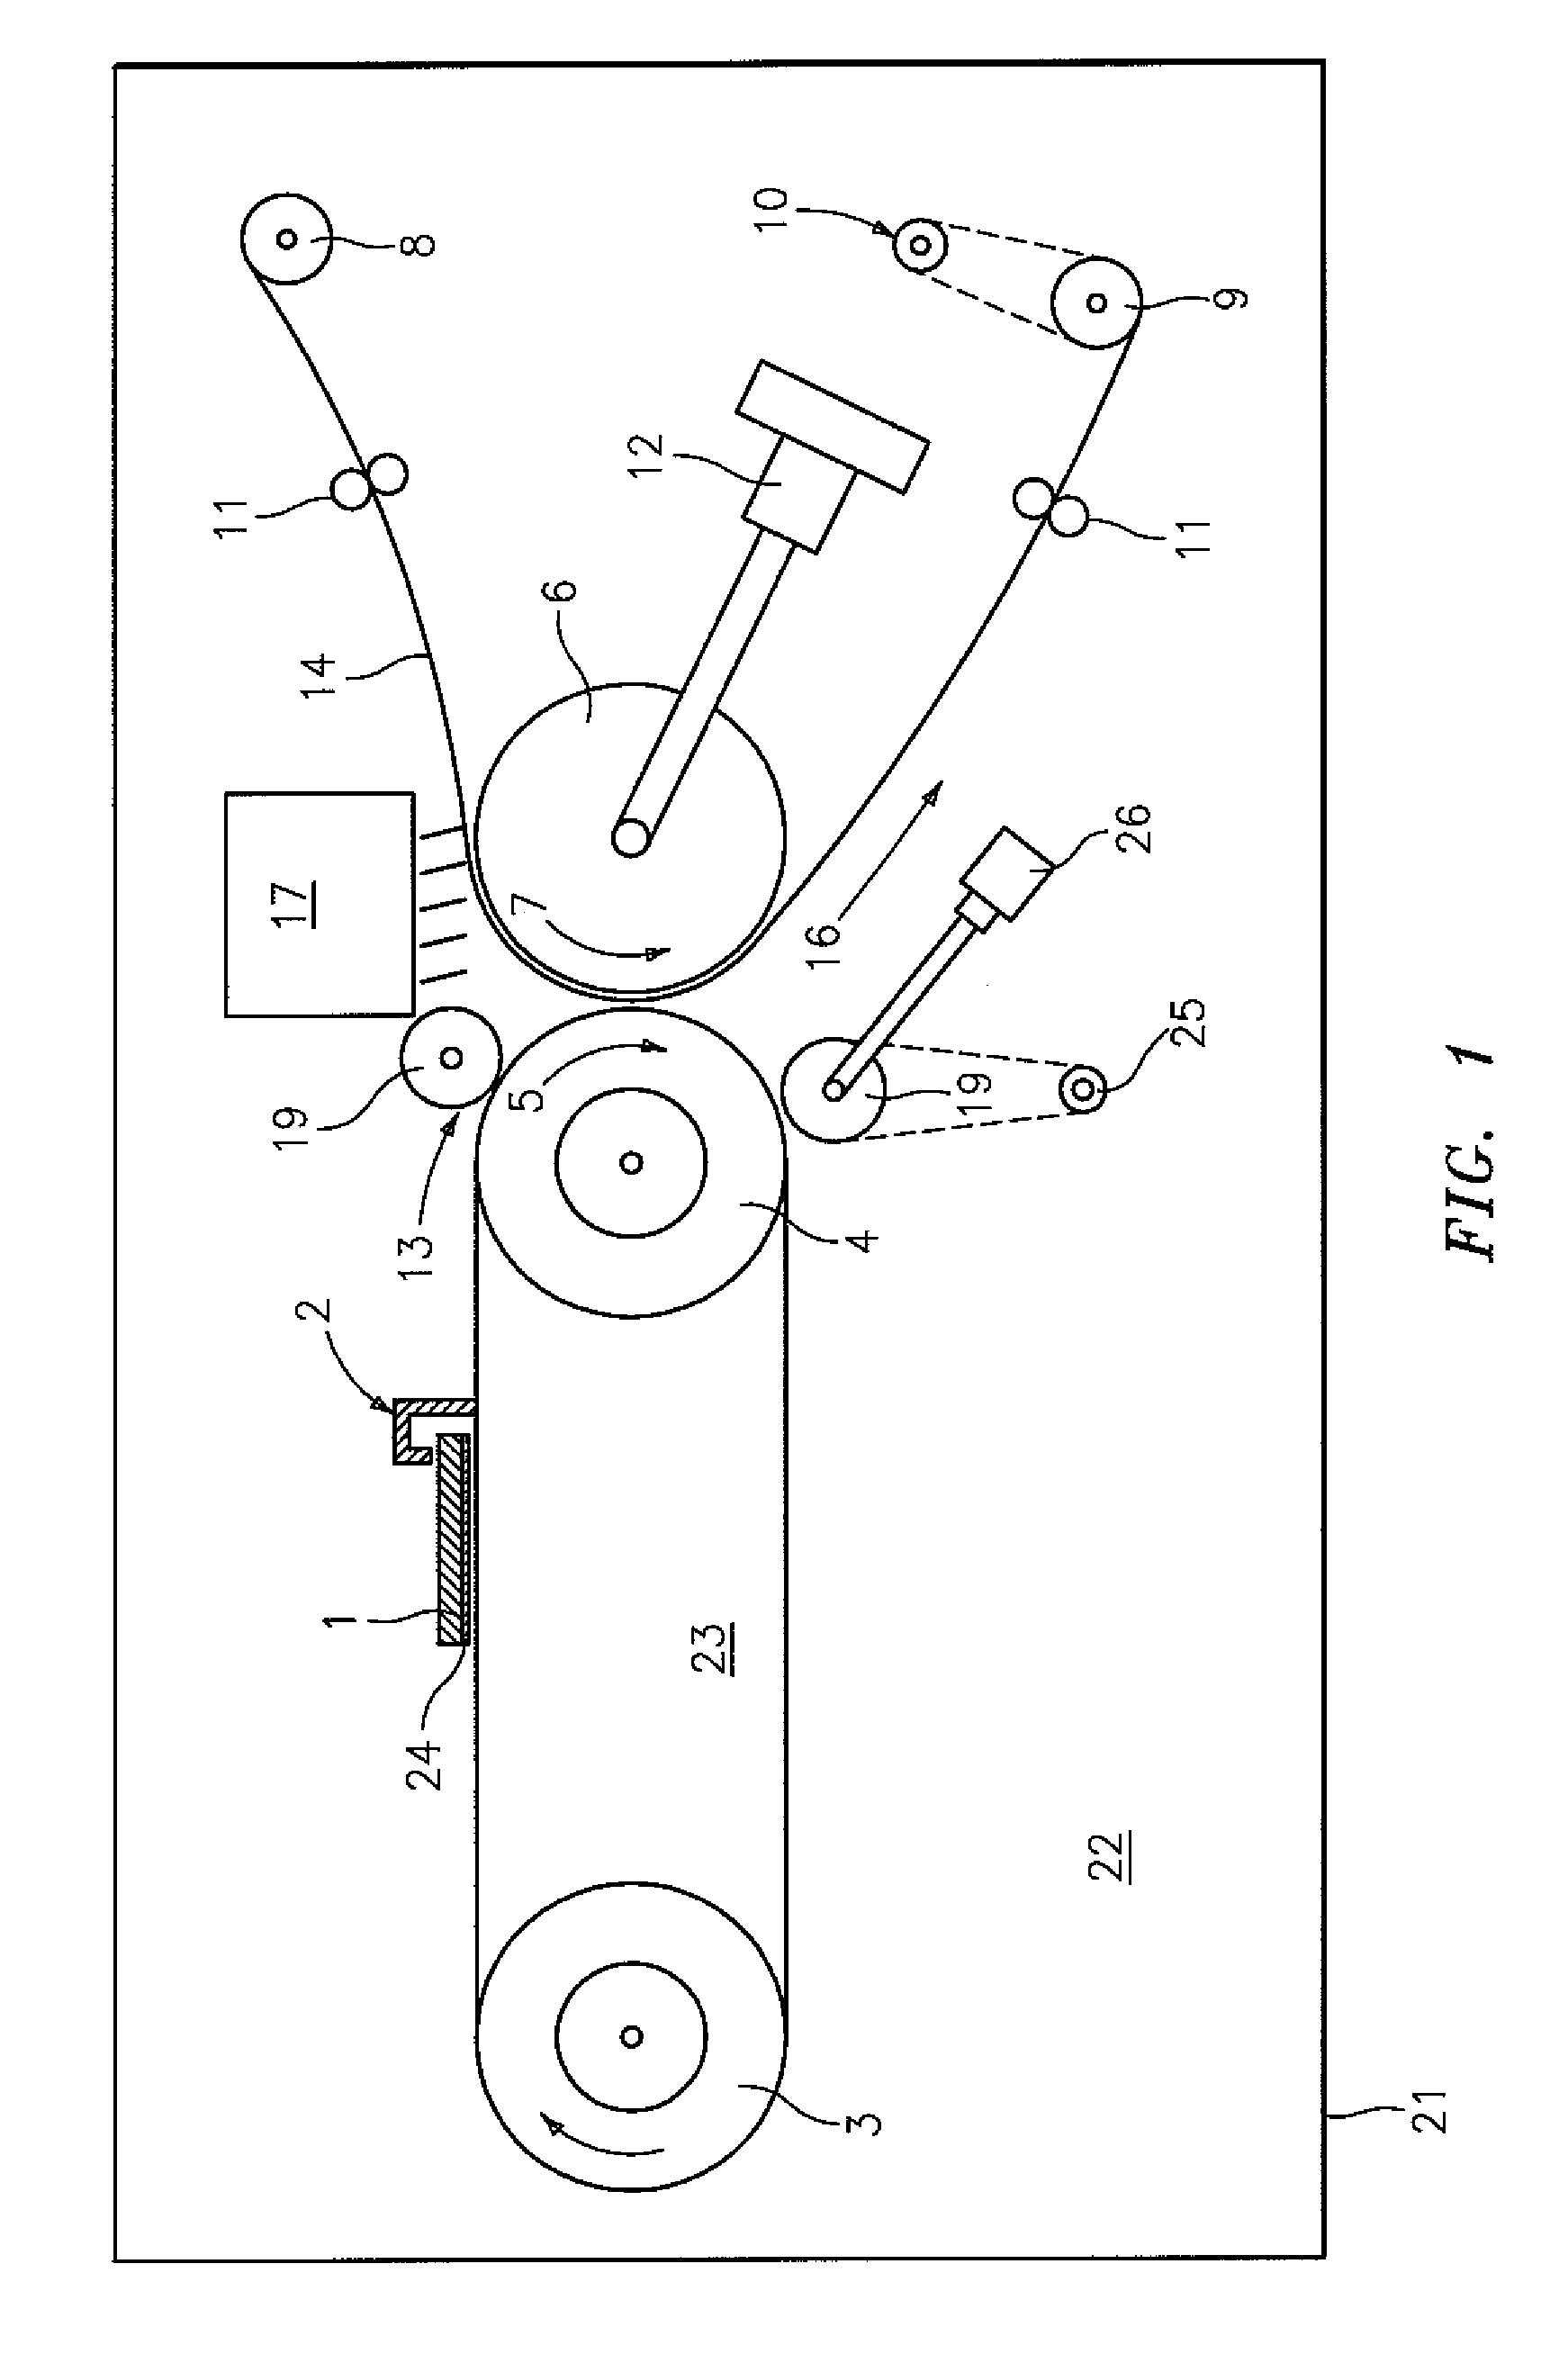 Method and Apparatus for Thermal Processing of Photosensitive Printing Elements